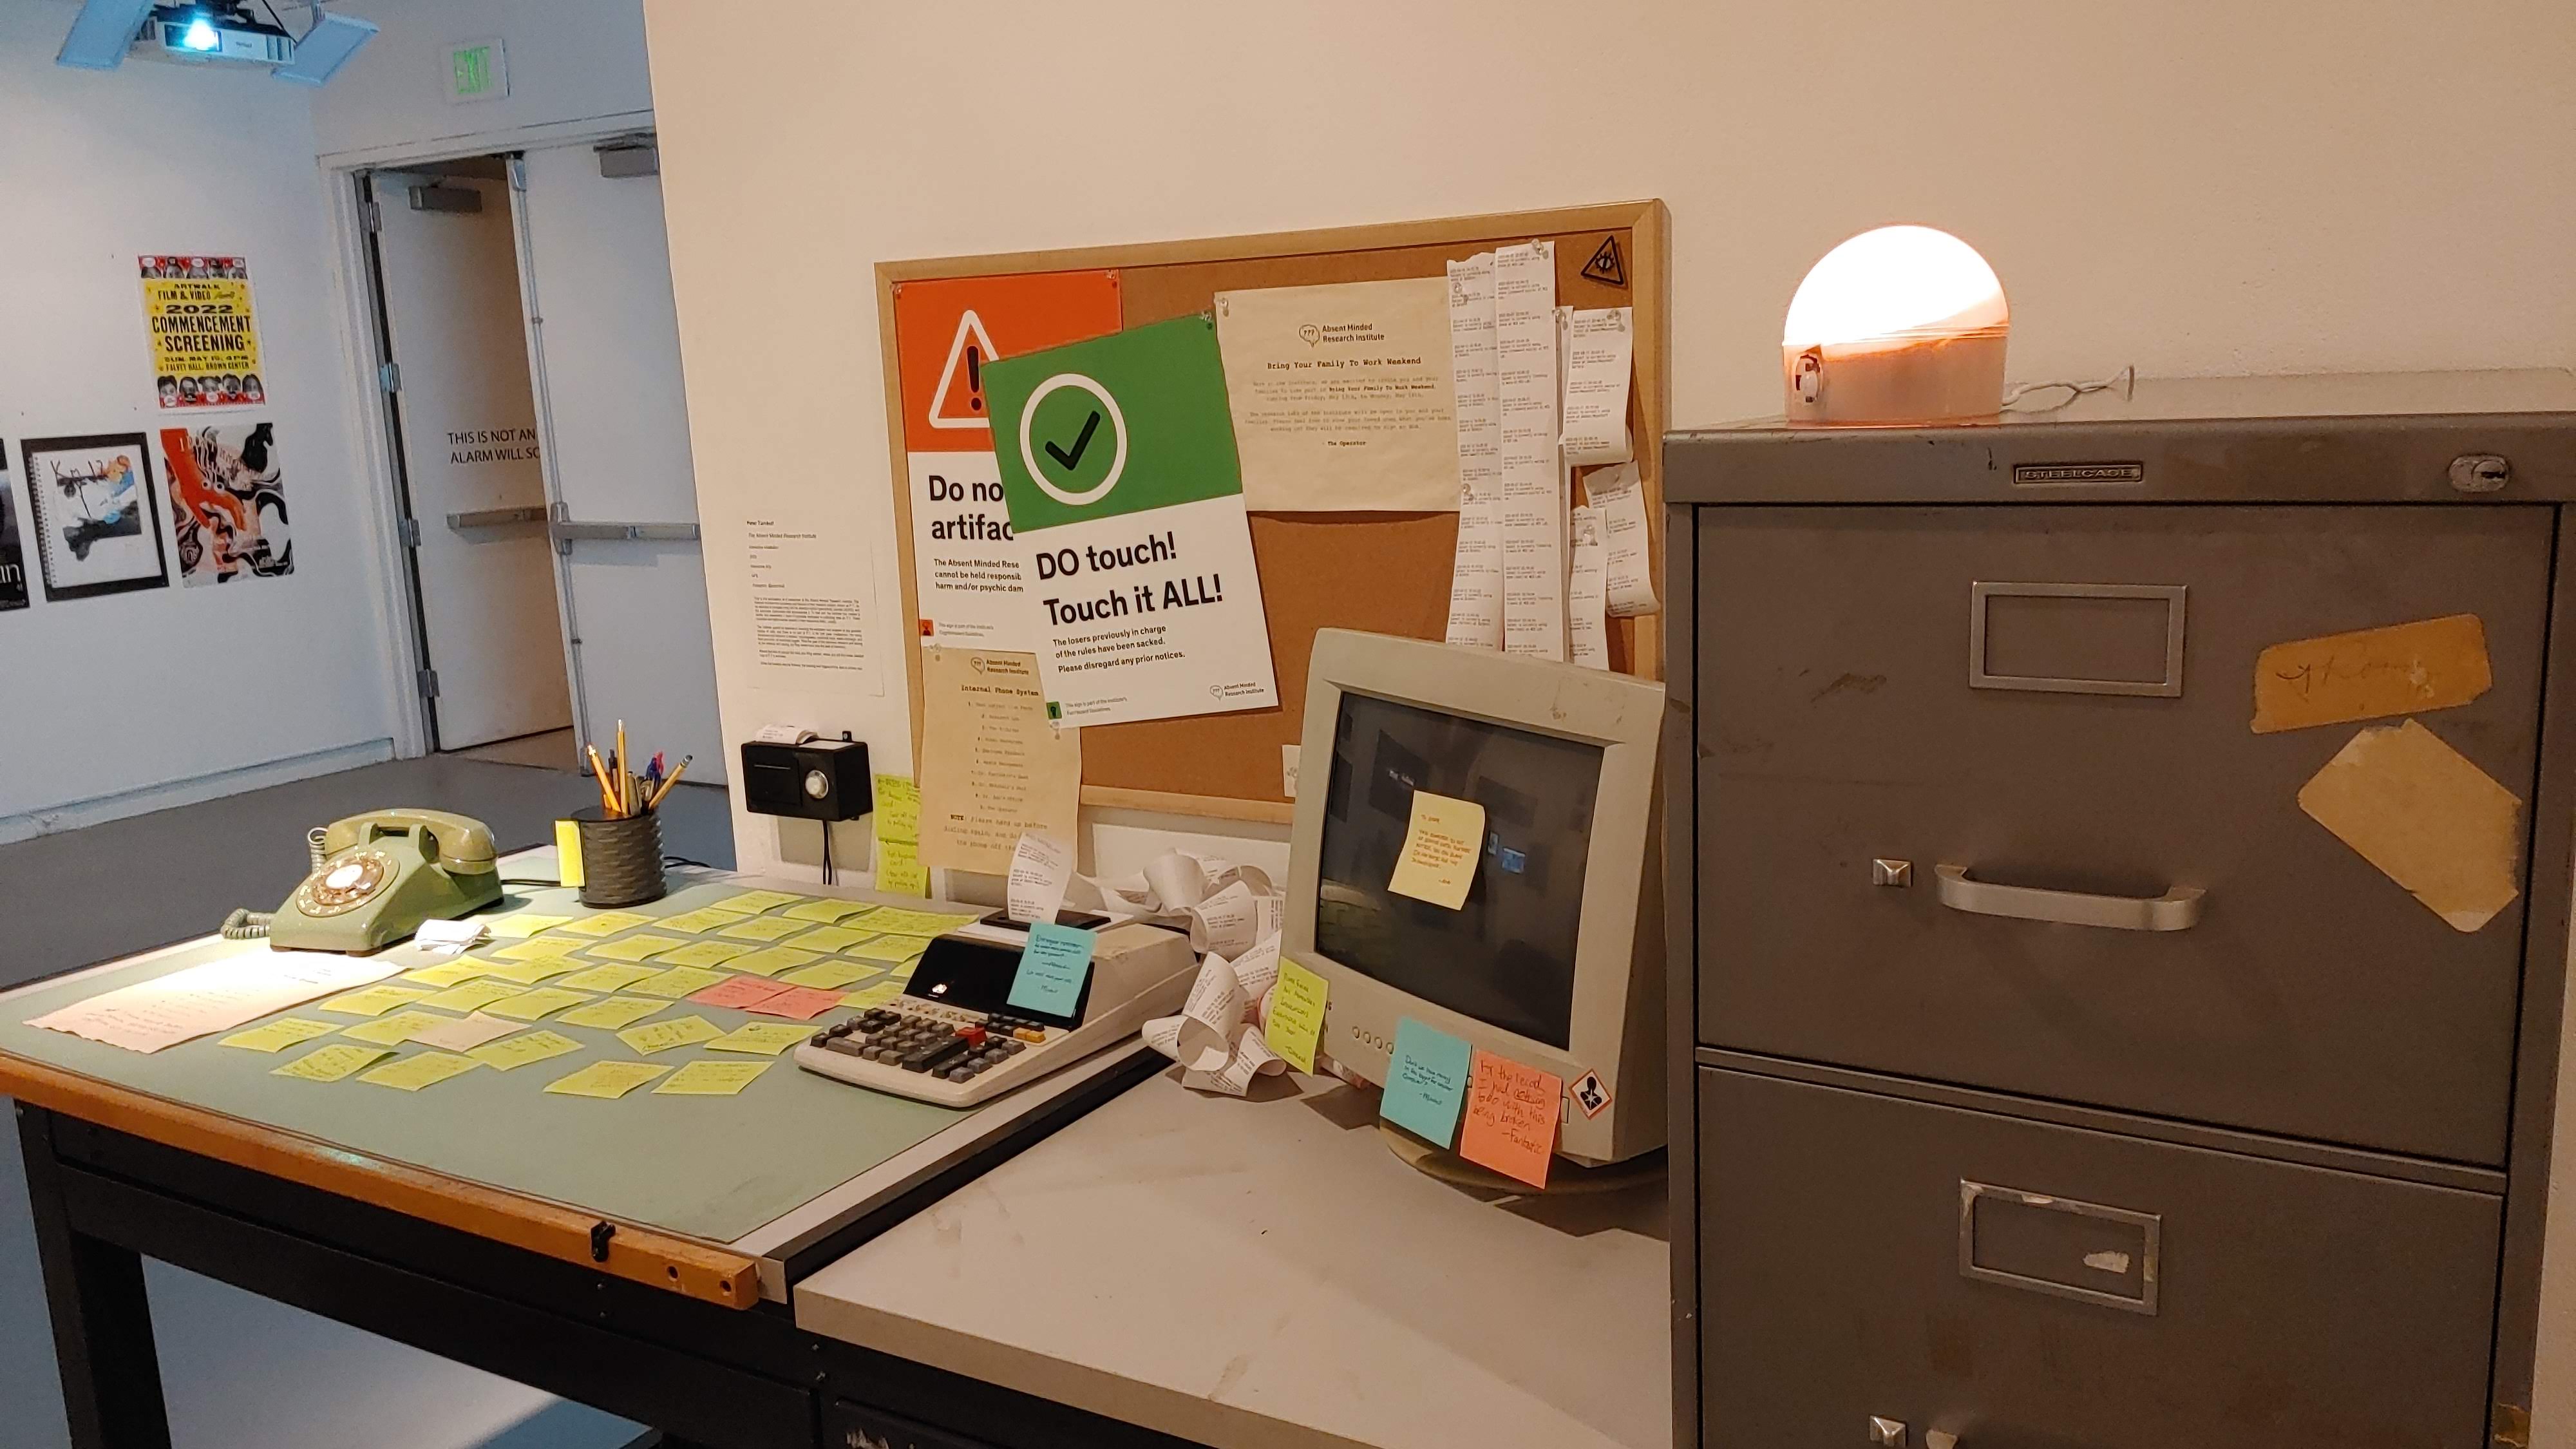 Photograph of thesis project on display. No people are present, just the desk is visible.